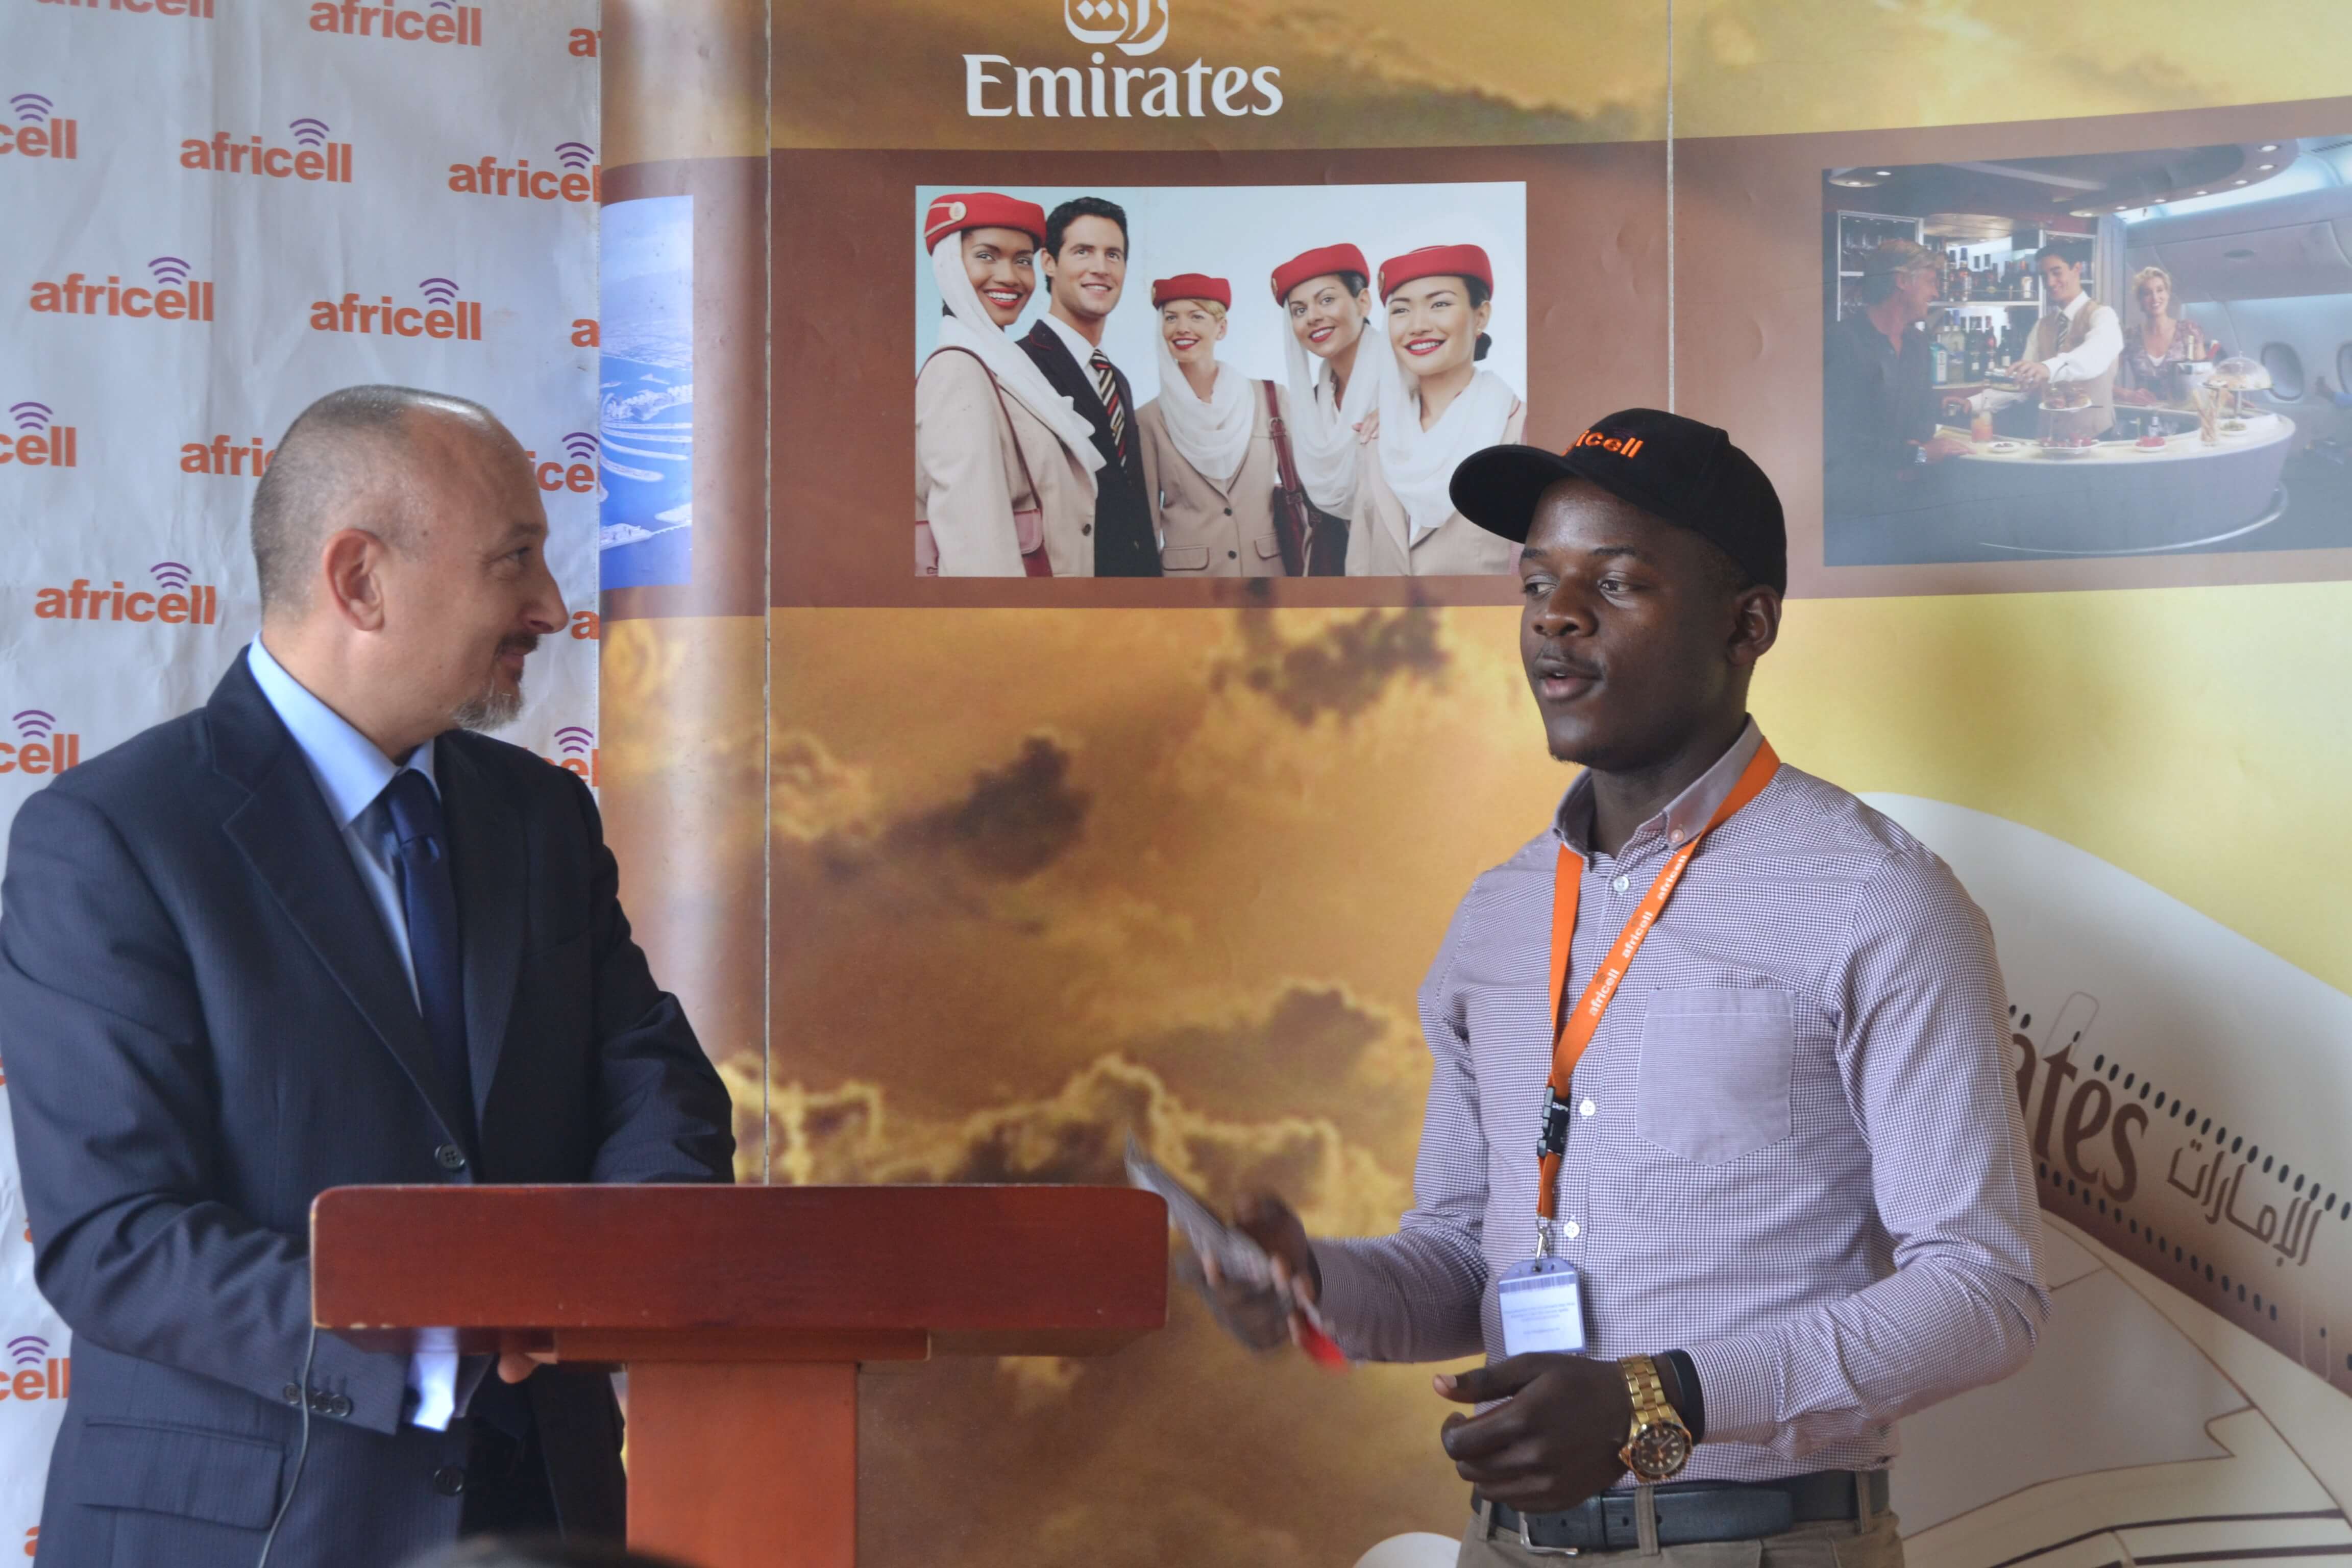 Domenico Fornara, the Italian Ambassador with a representative from Africell Uganda at the press conference today